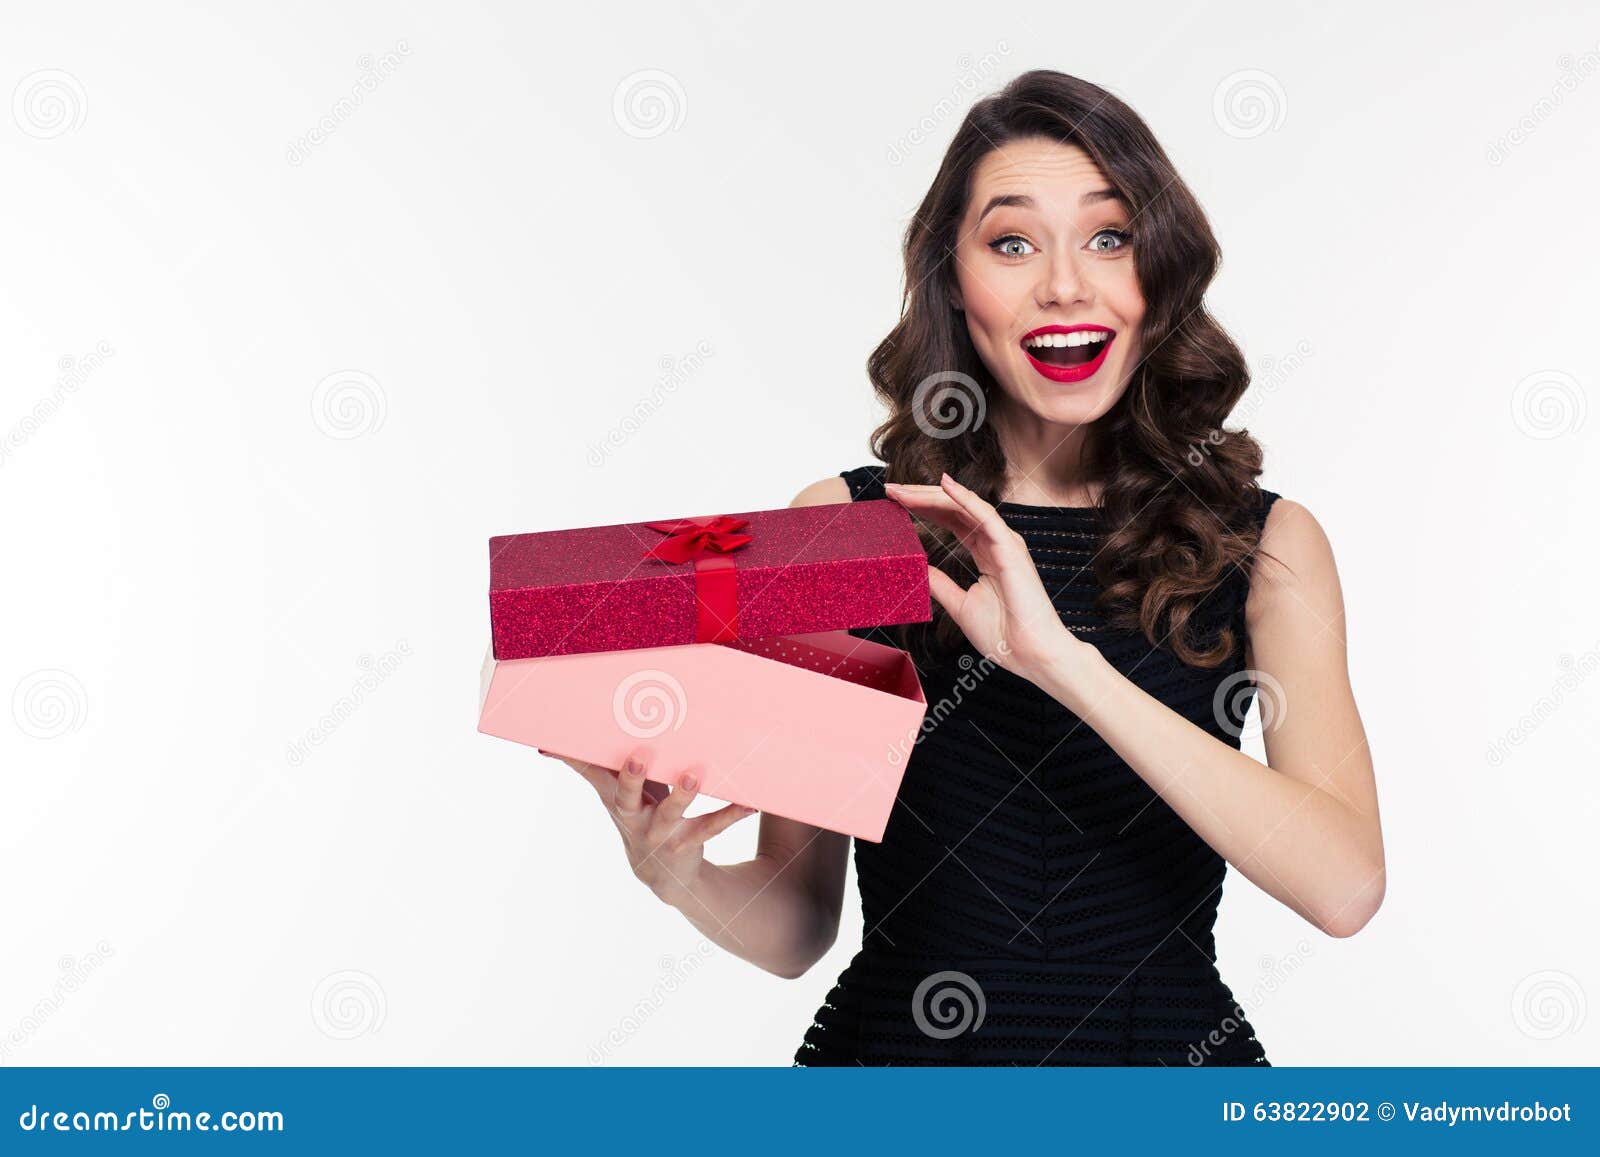 excited cheerful attractive young woman with retro hairstyle opening gift